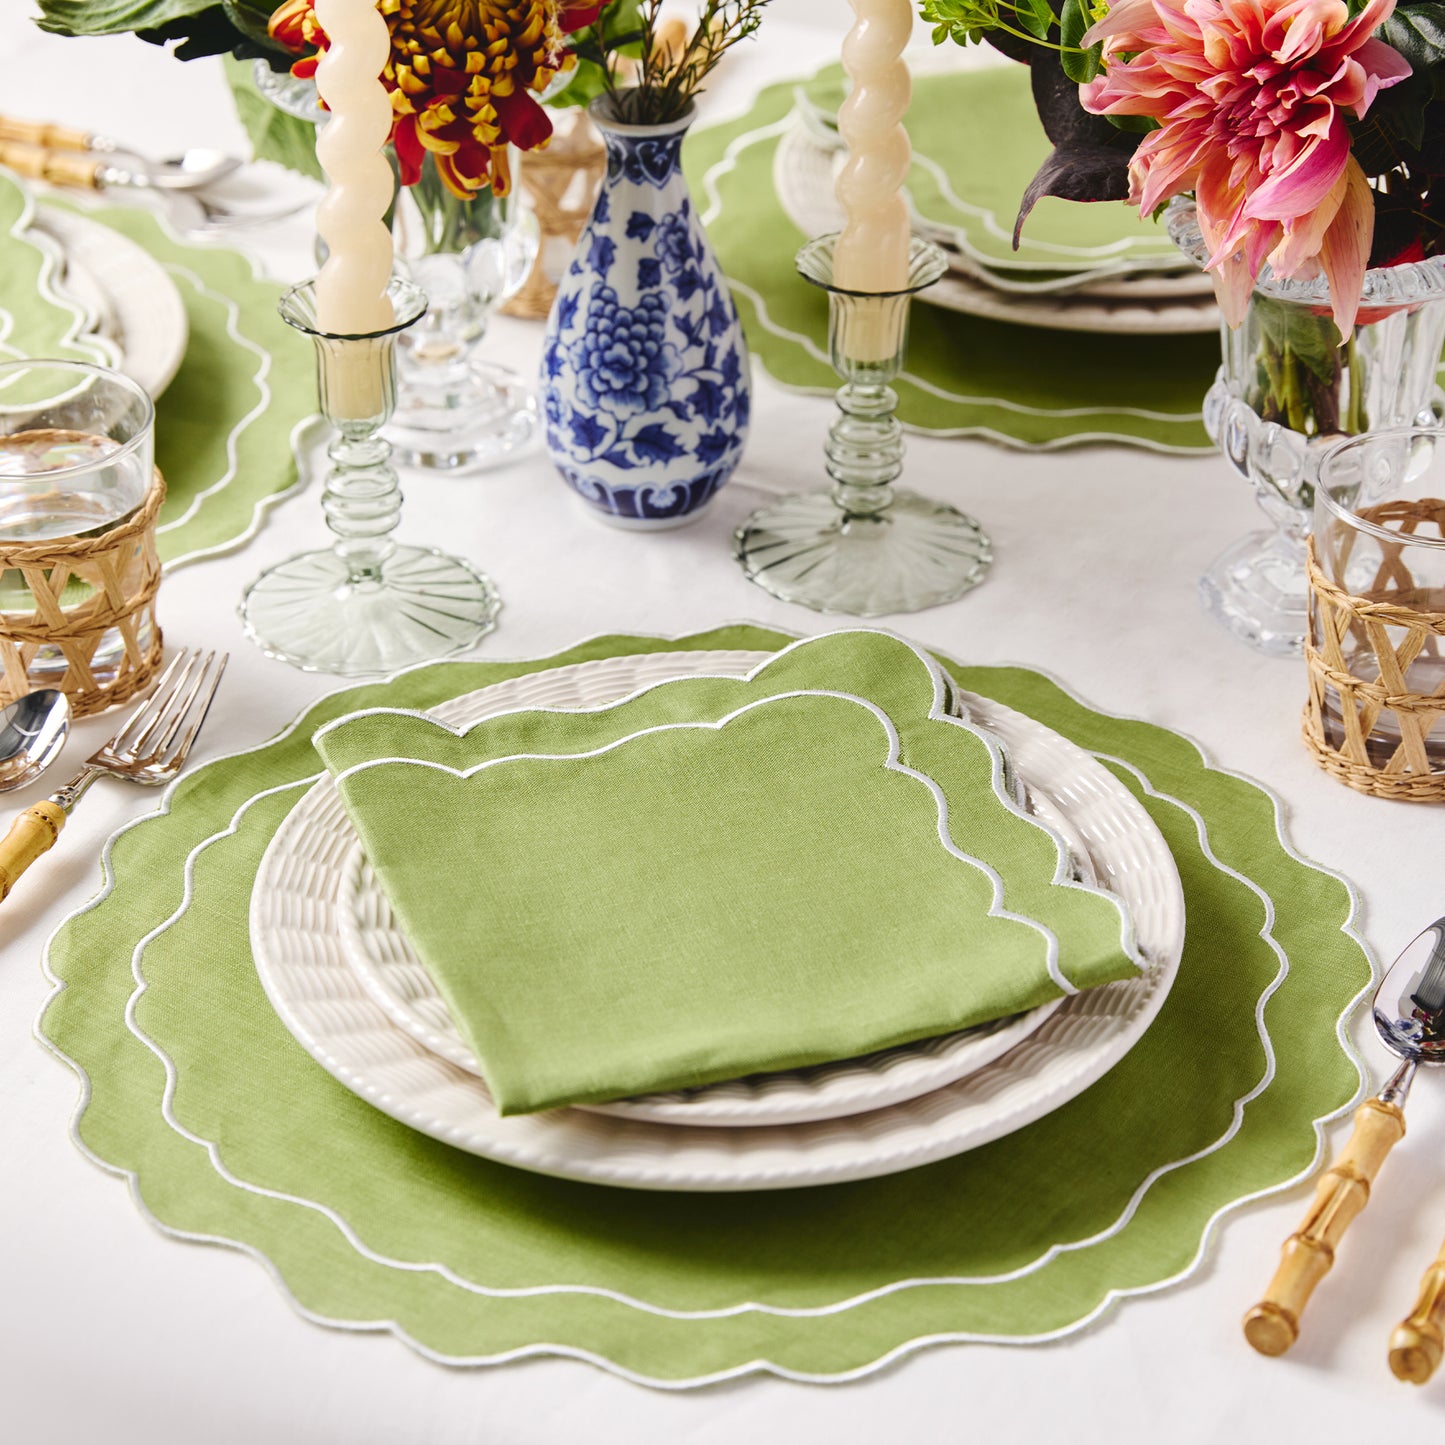 Set of 4 - Linen Scalloped Edged Placemats - Green